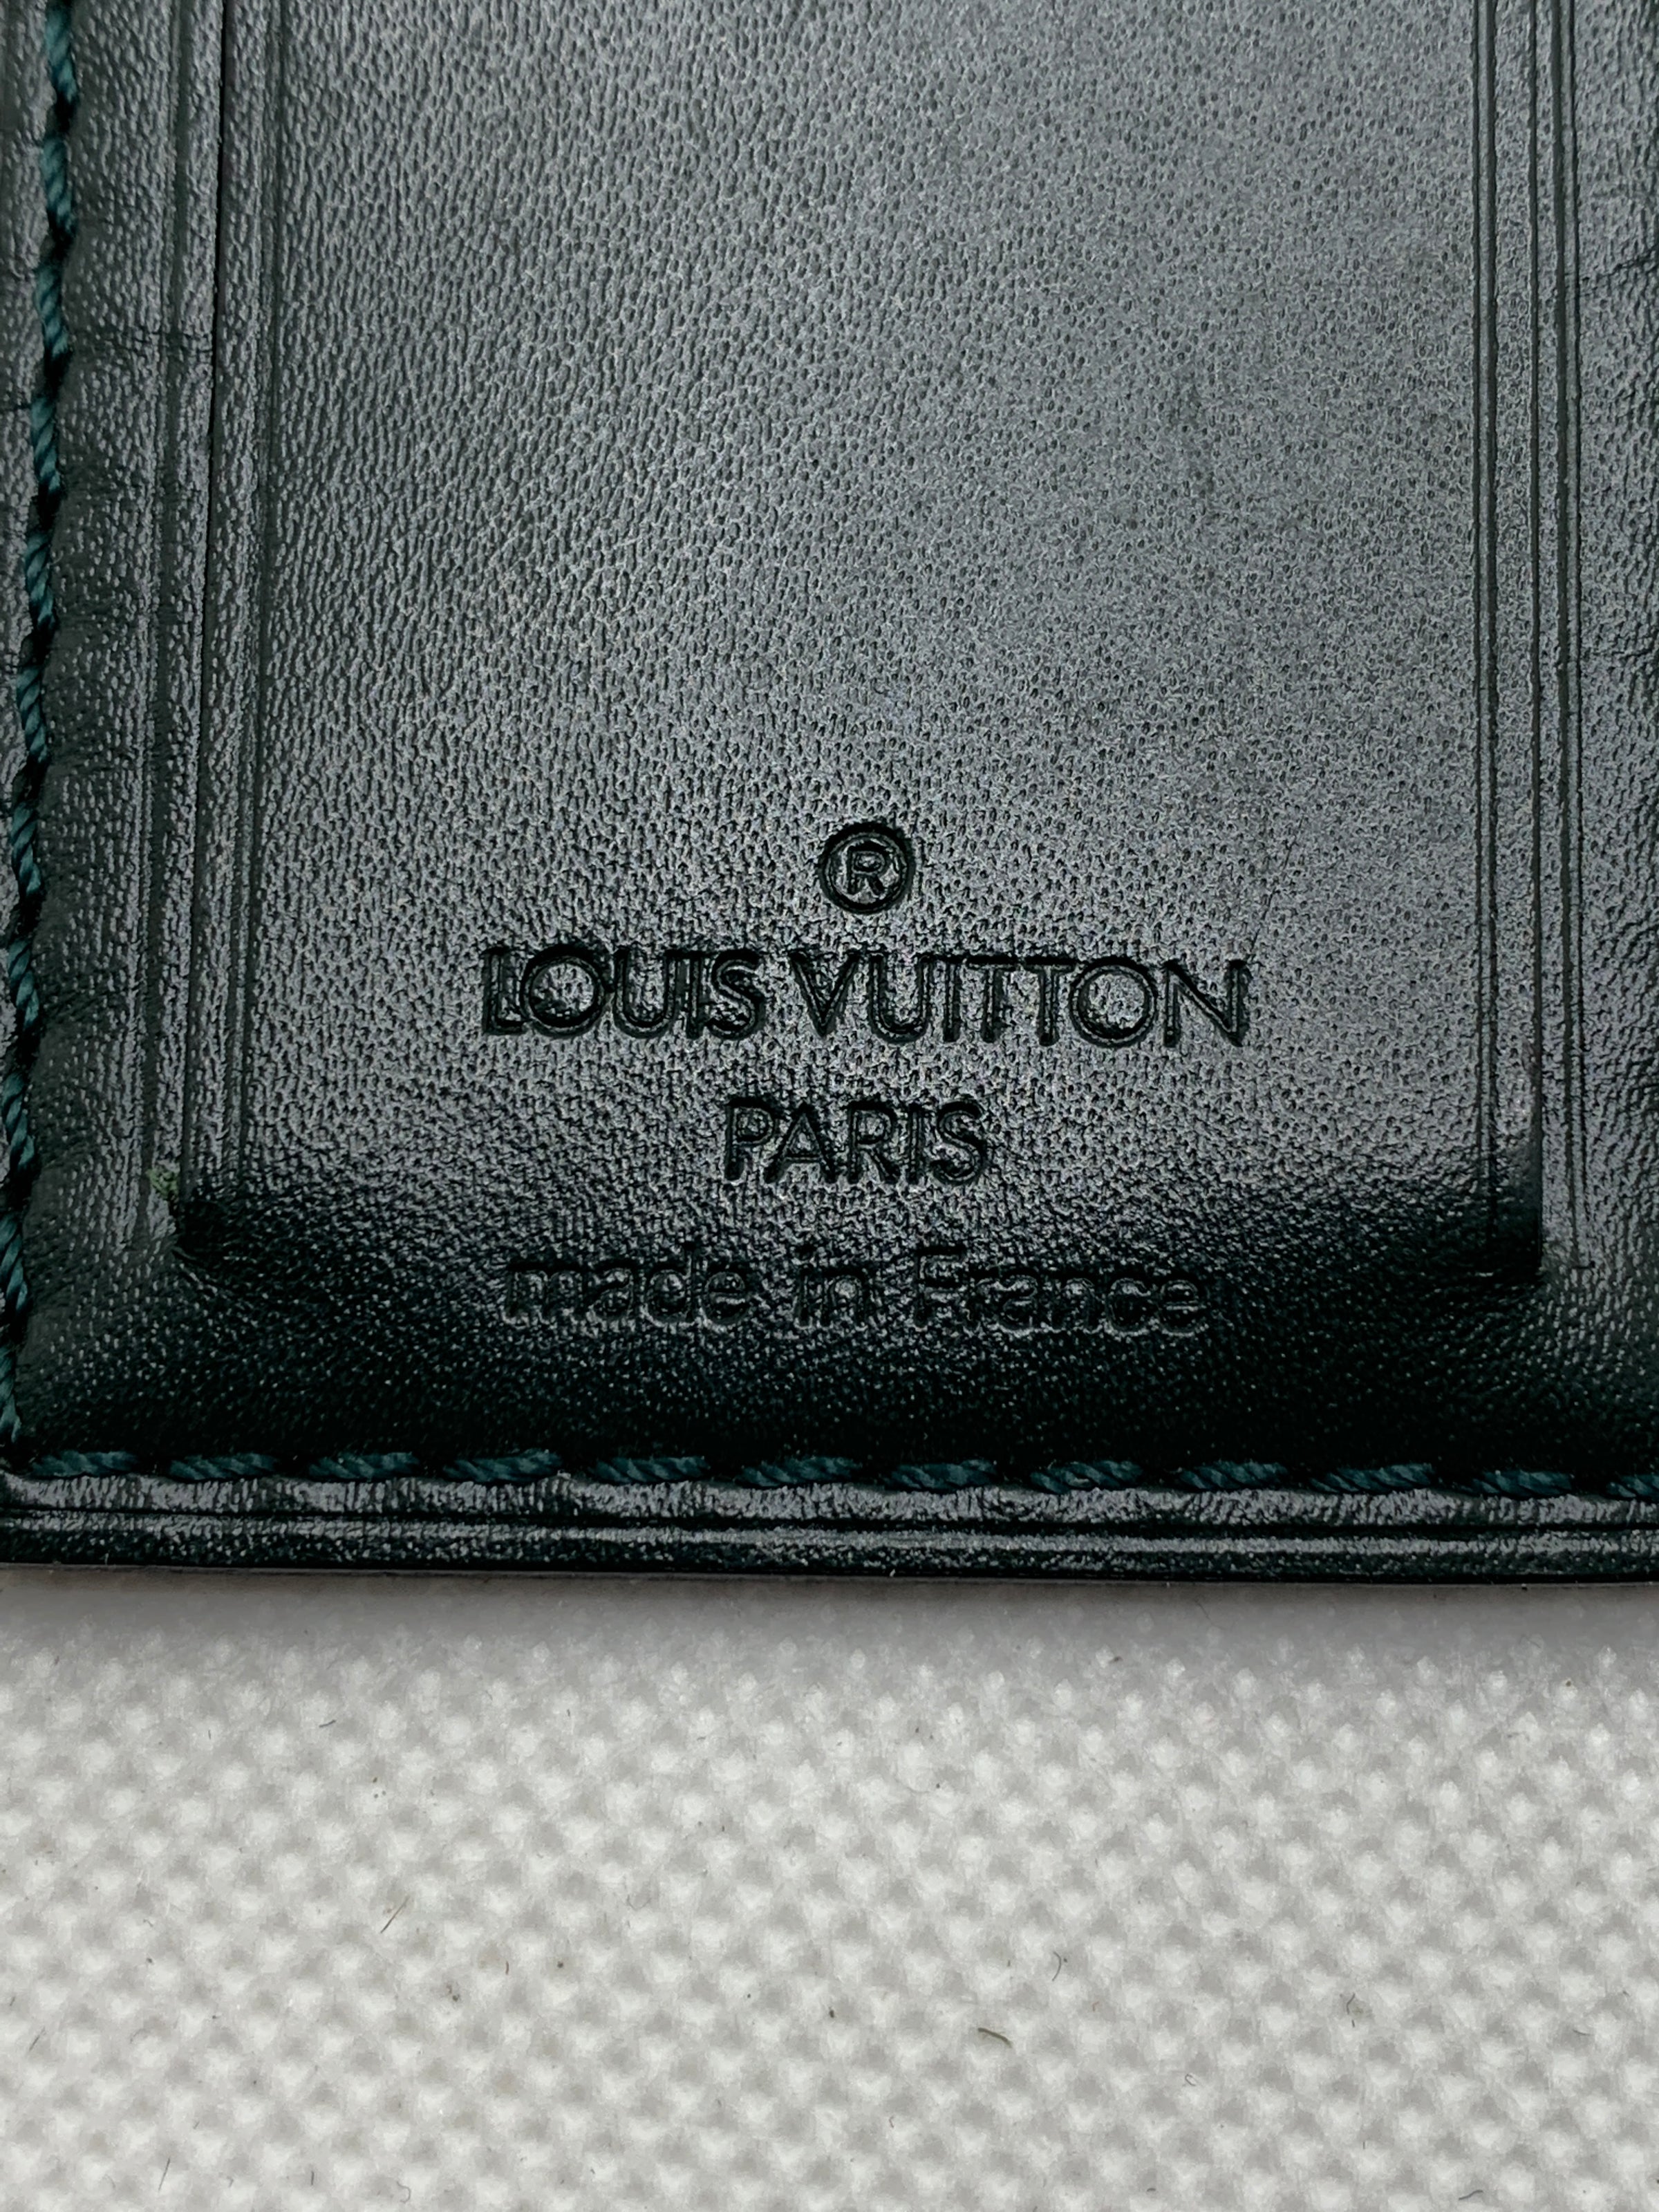 Authentic Louis Vuitton Large Dark Green Leather Luggage Tag Stamped K.K